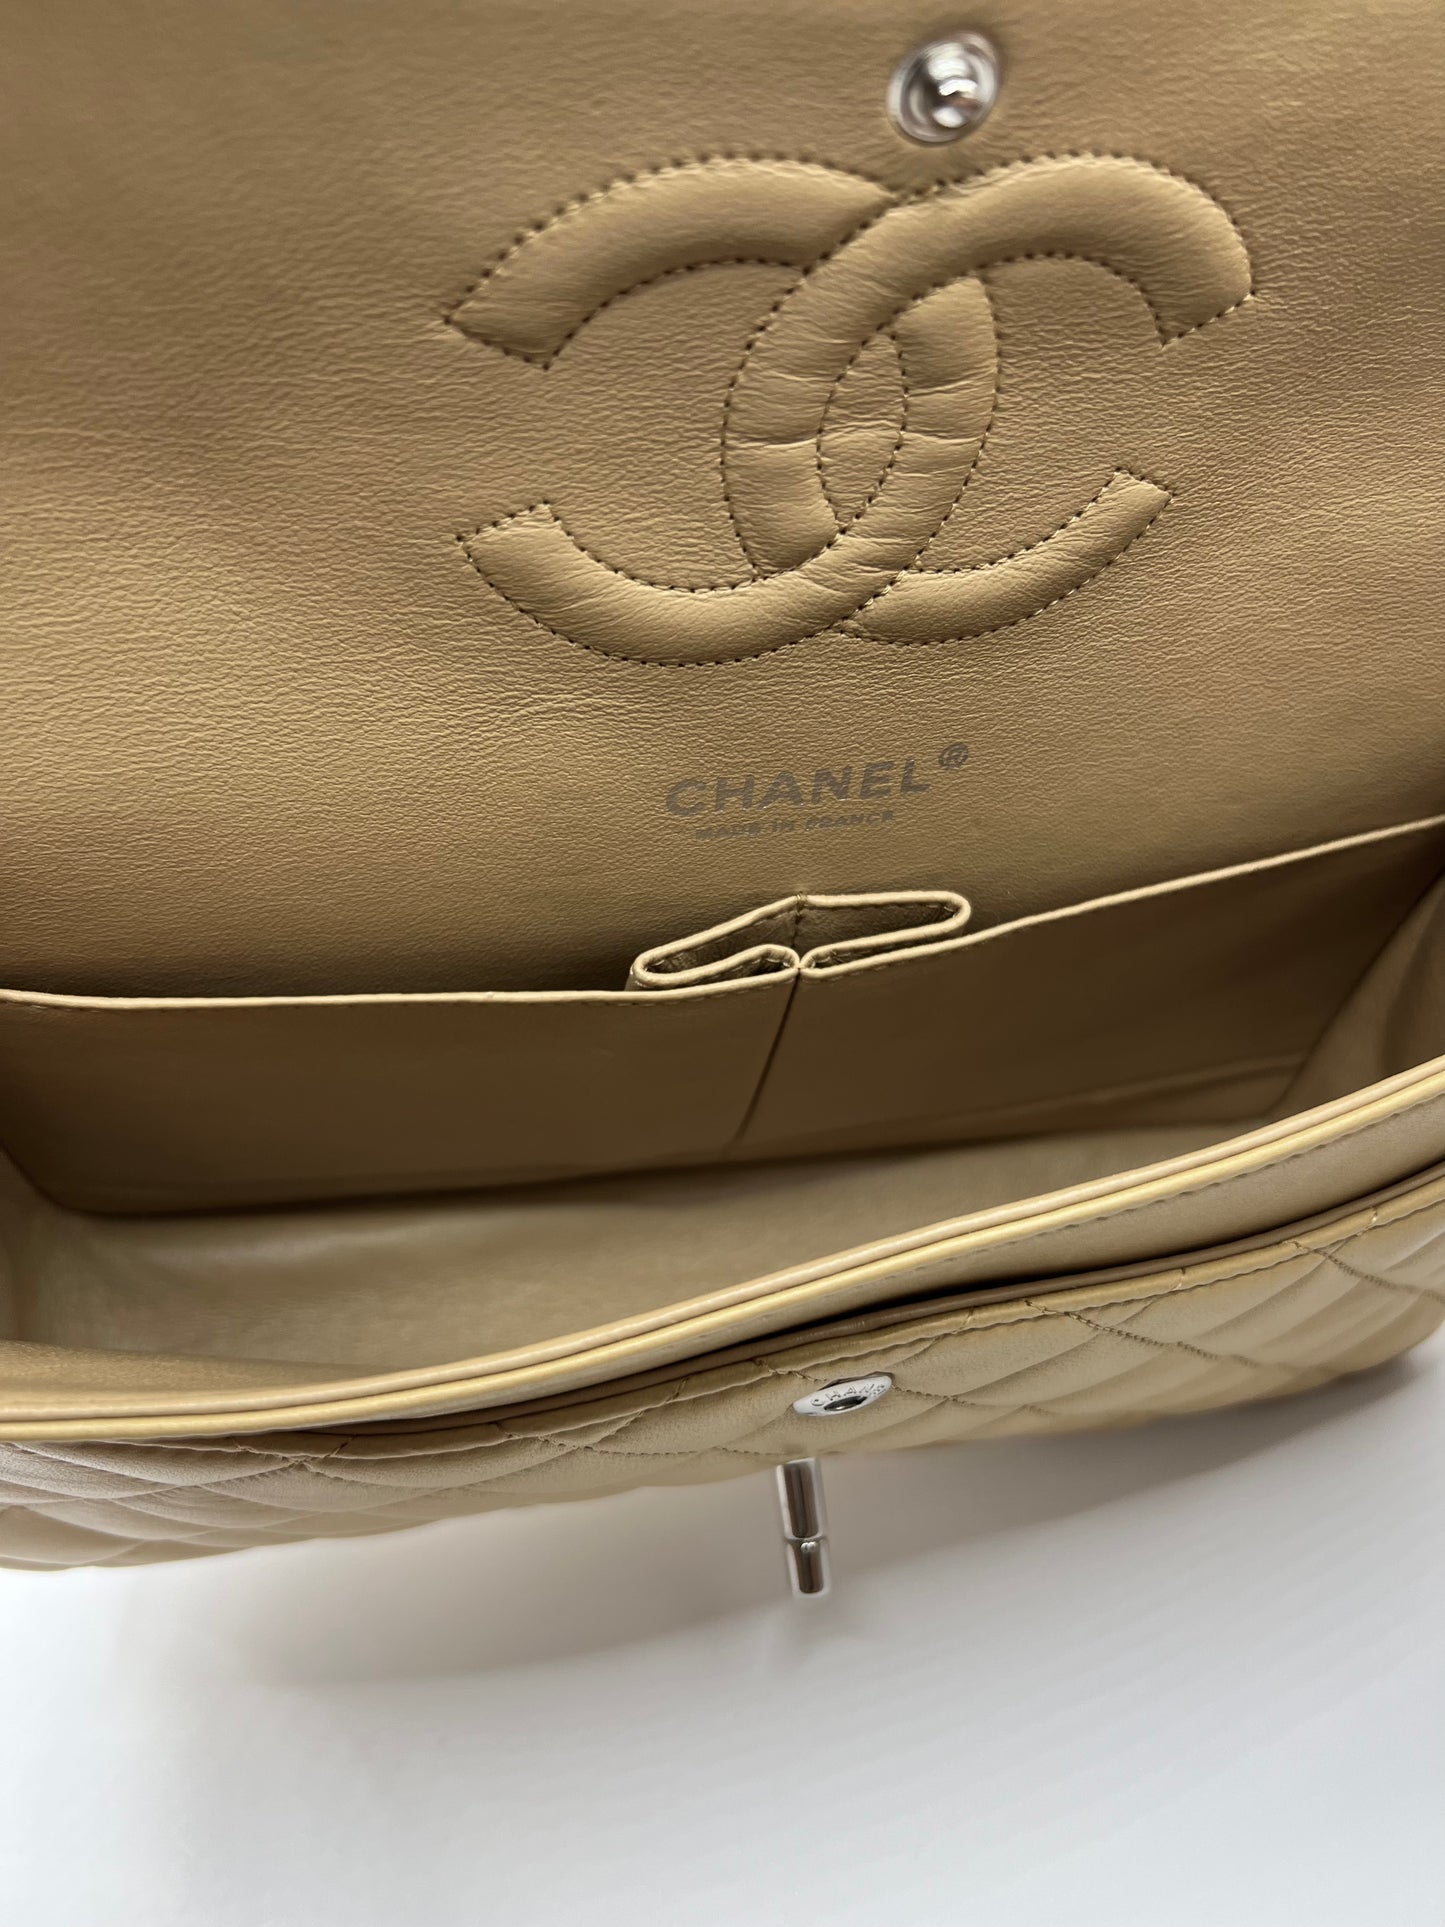 Chanel classic double flap